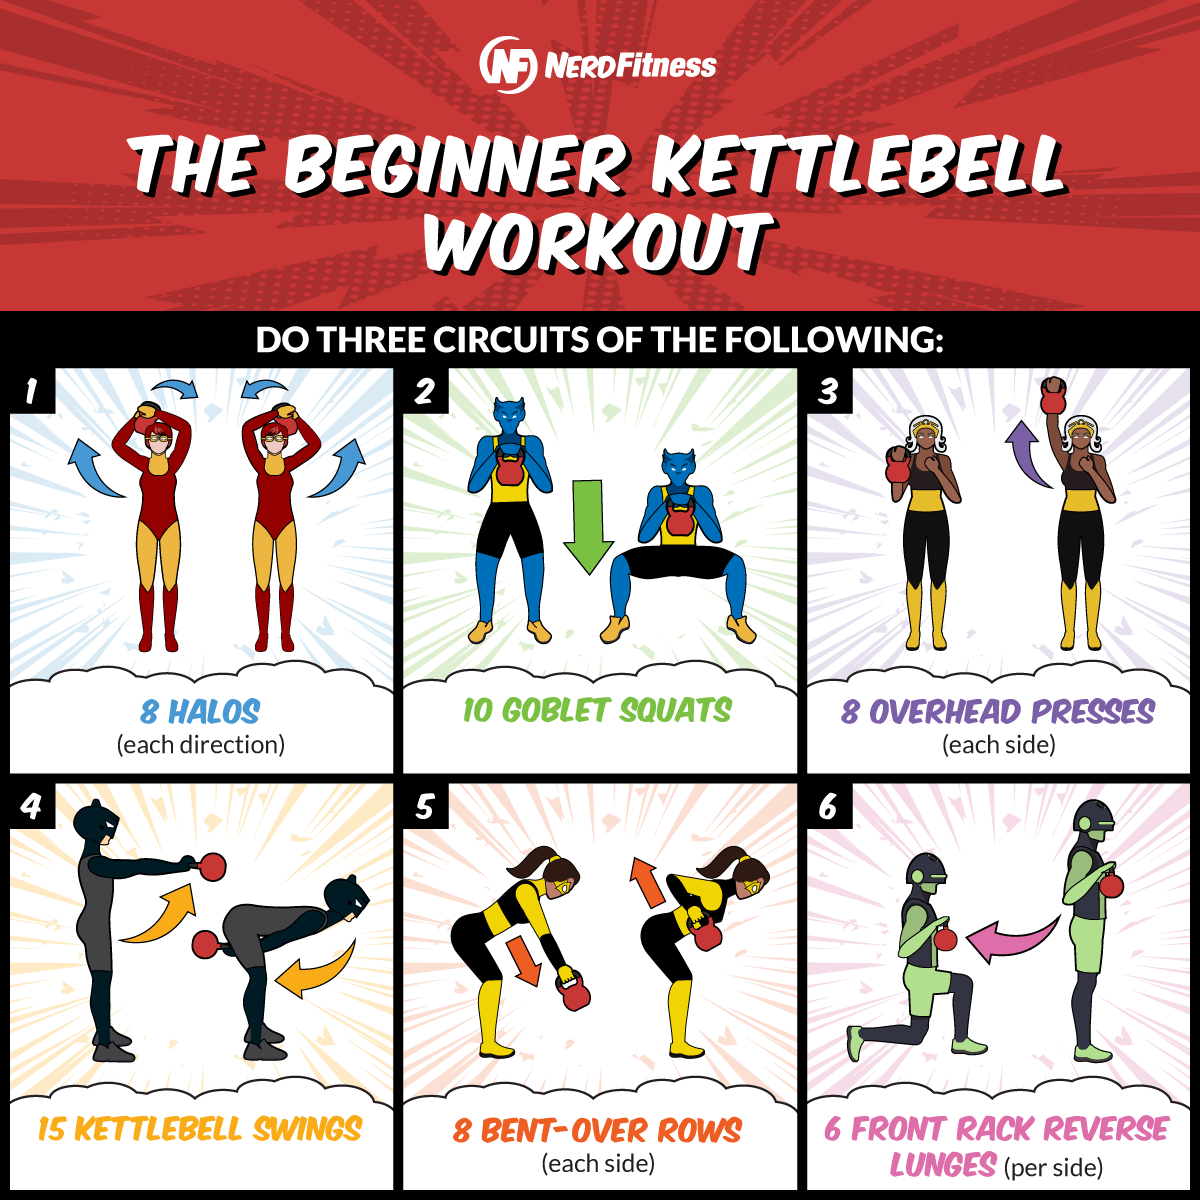 The Kettlebell Workout (20-Minute Routine for Beginners)